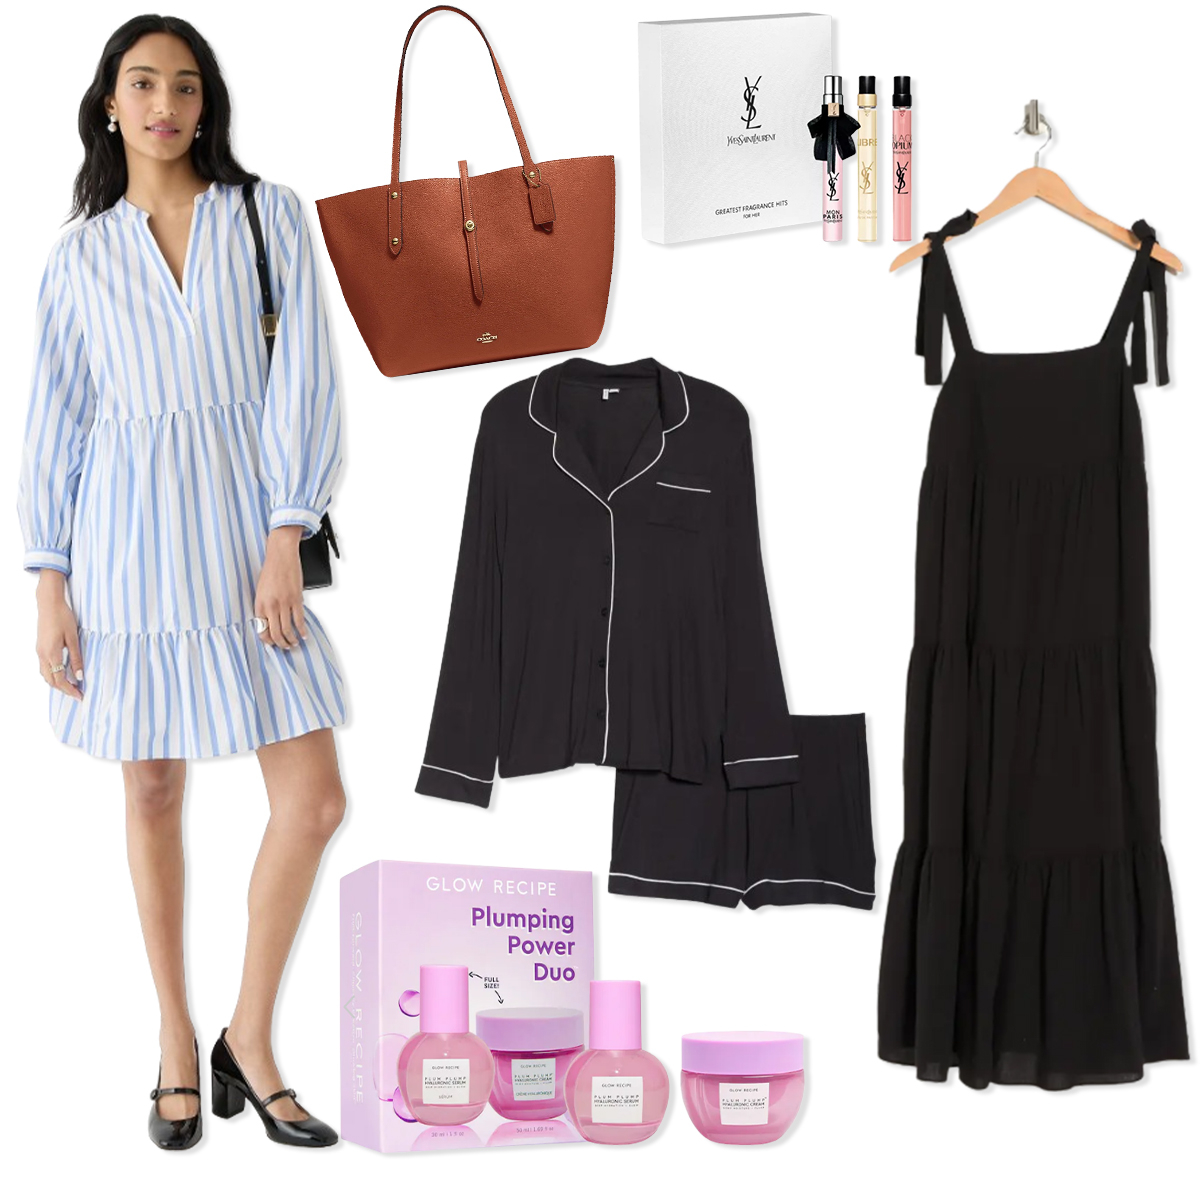 Mother’s Day Gifts: Nordstrom & More With Buy Online, Pick Up in Store